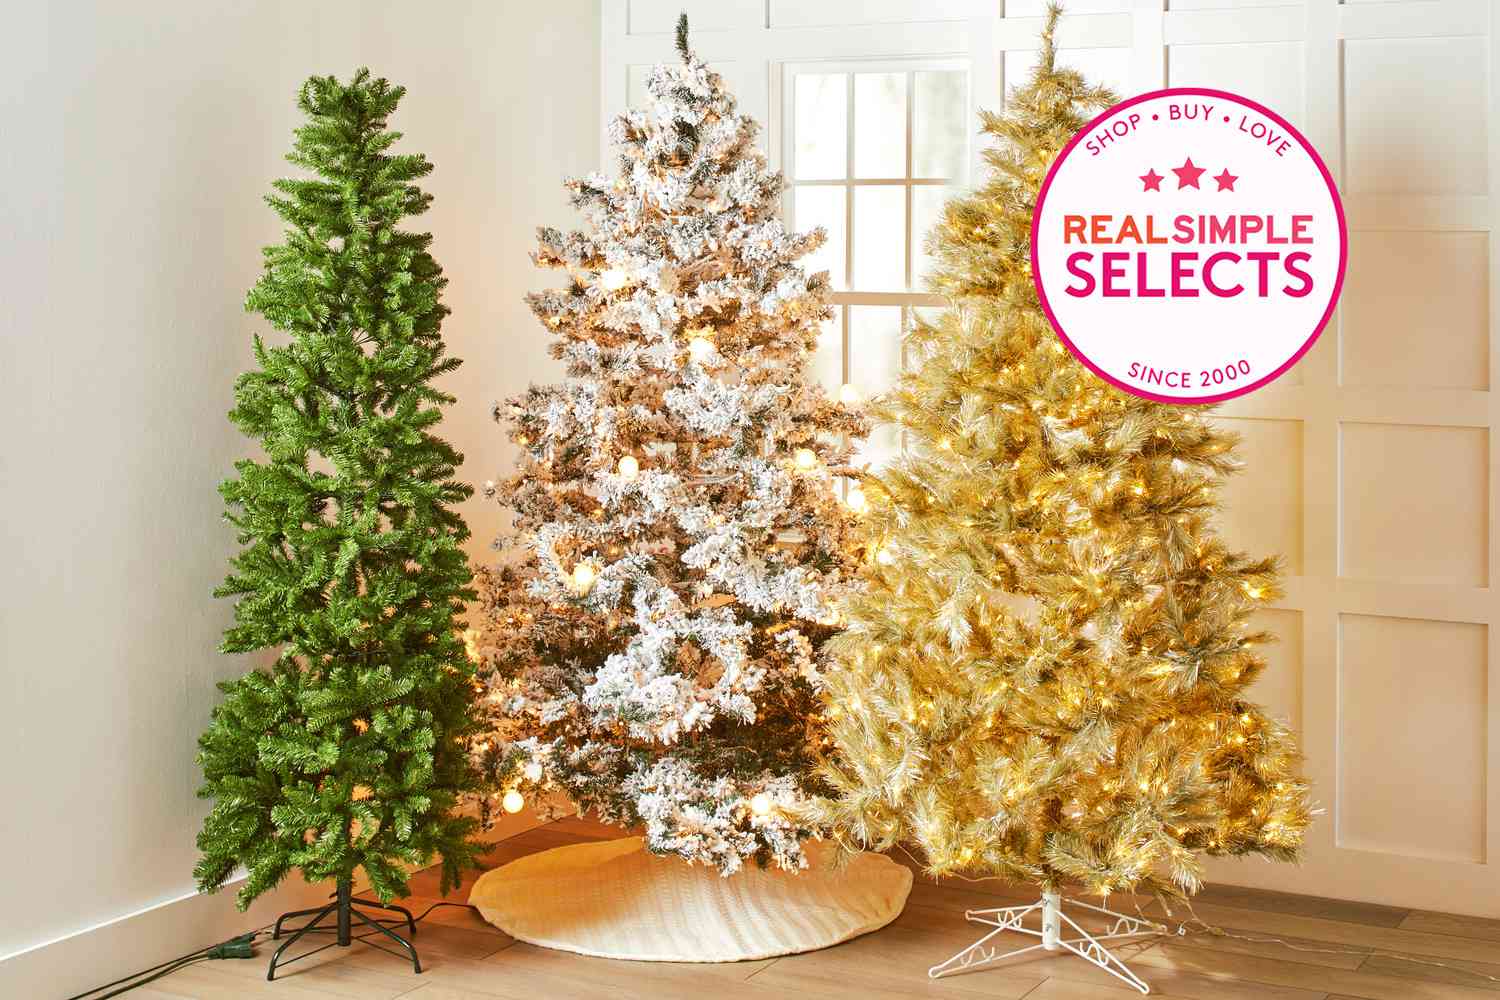 Where To Buy Artificial Christmas Trees?